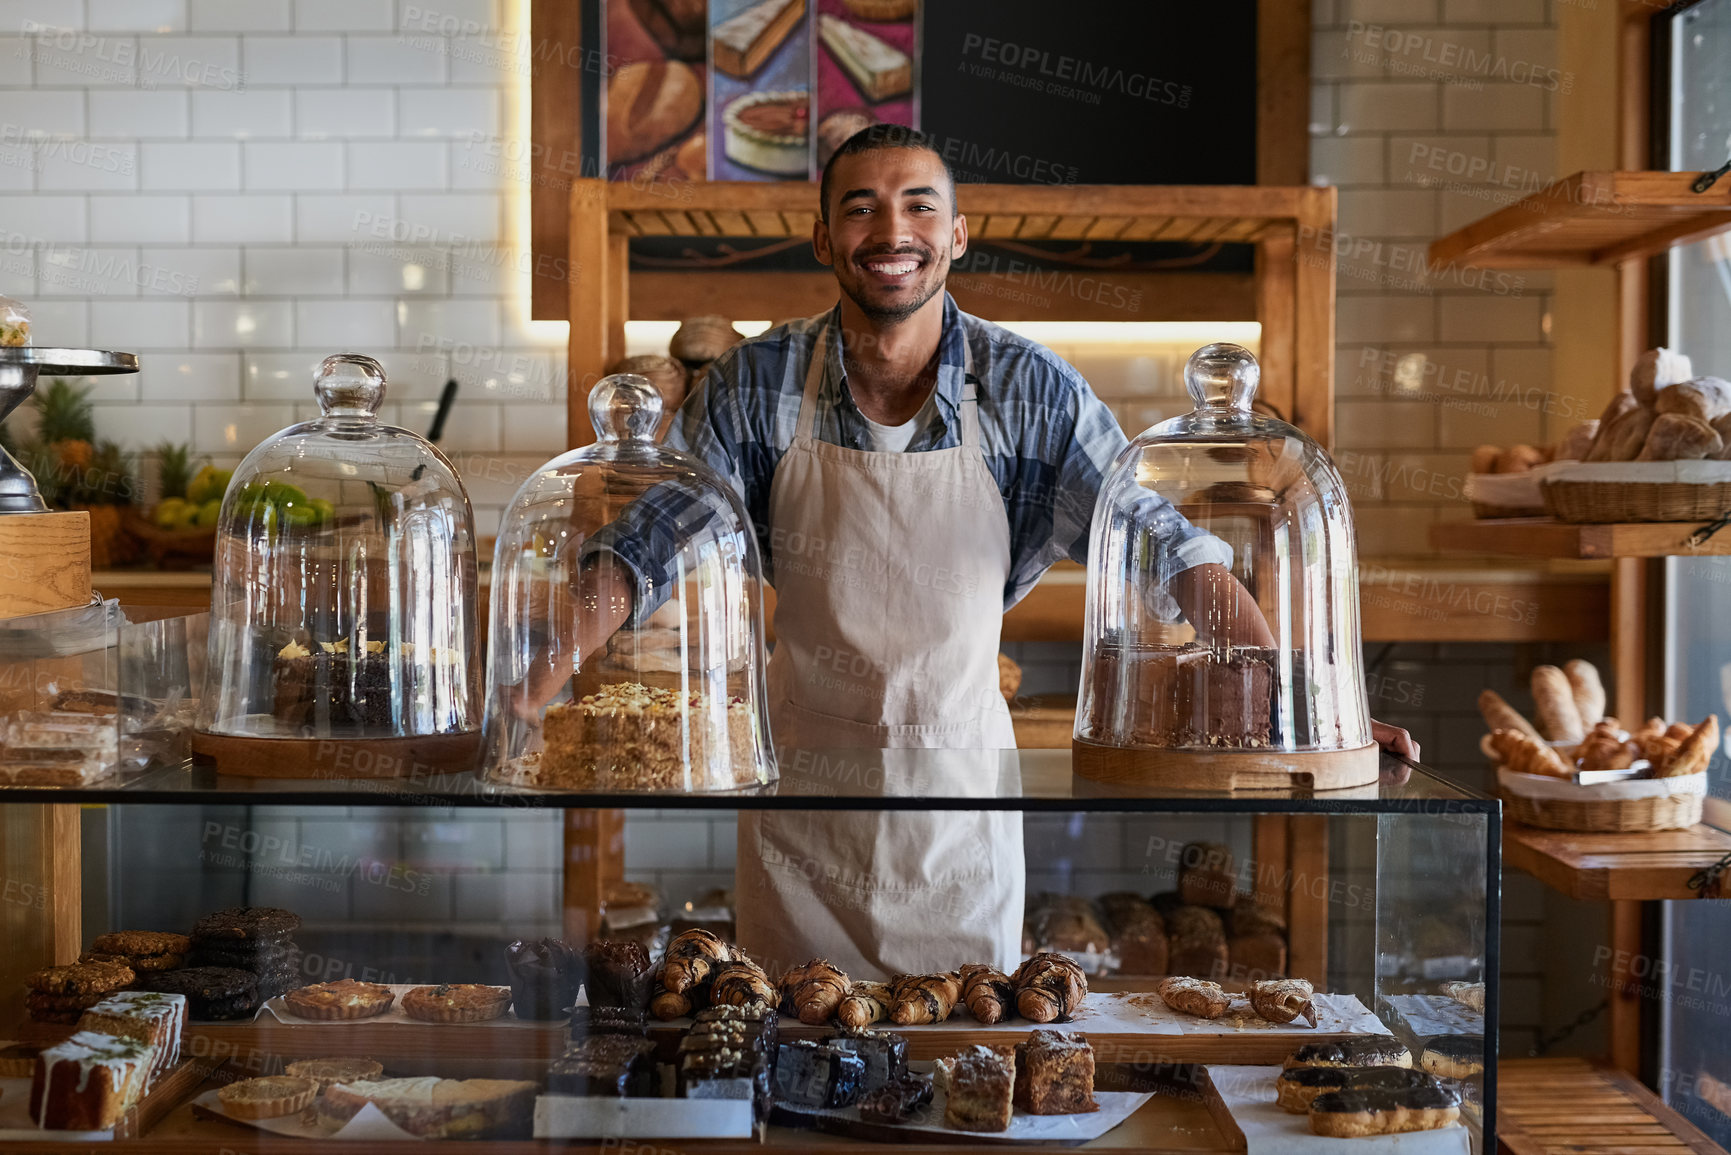 Buy stock photo Portrait of a young business owner standing behind the counter of his bakery